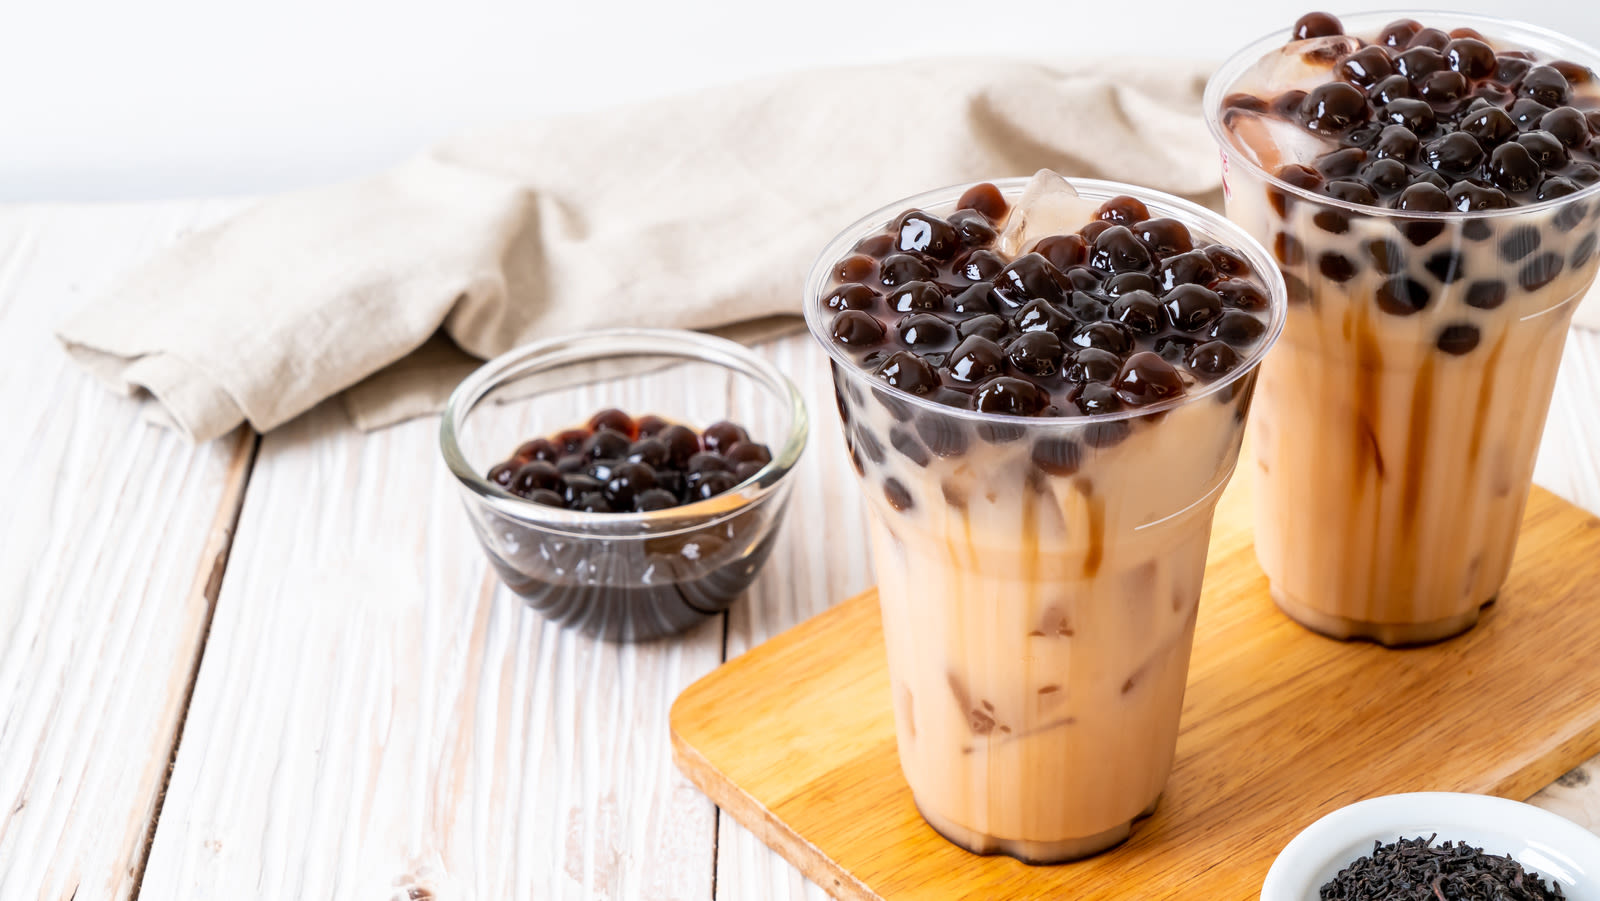 Yes, You Can Eat The Pearls In Your Bubble Tea, But Here's What To Keep In Mind